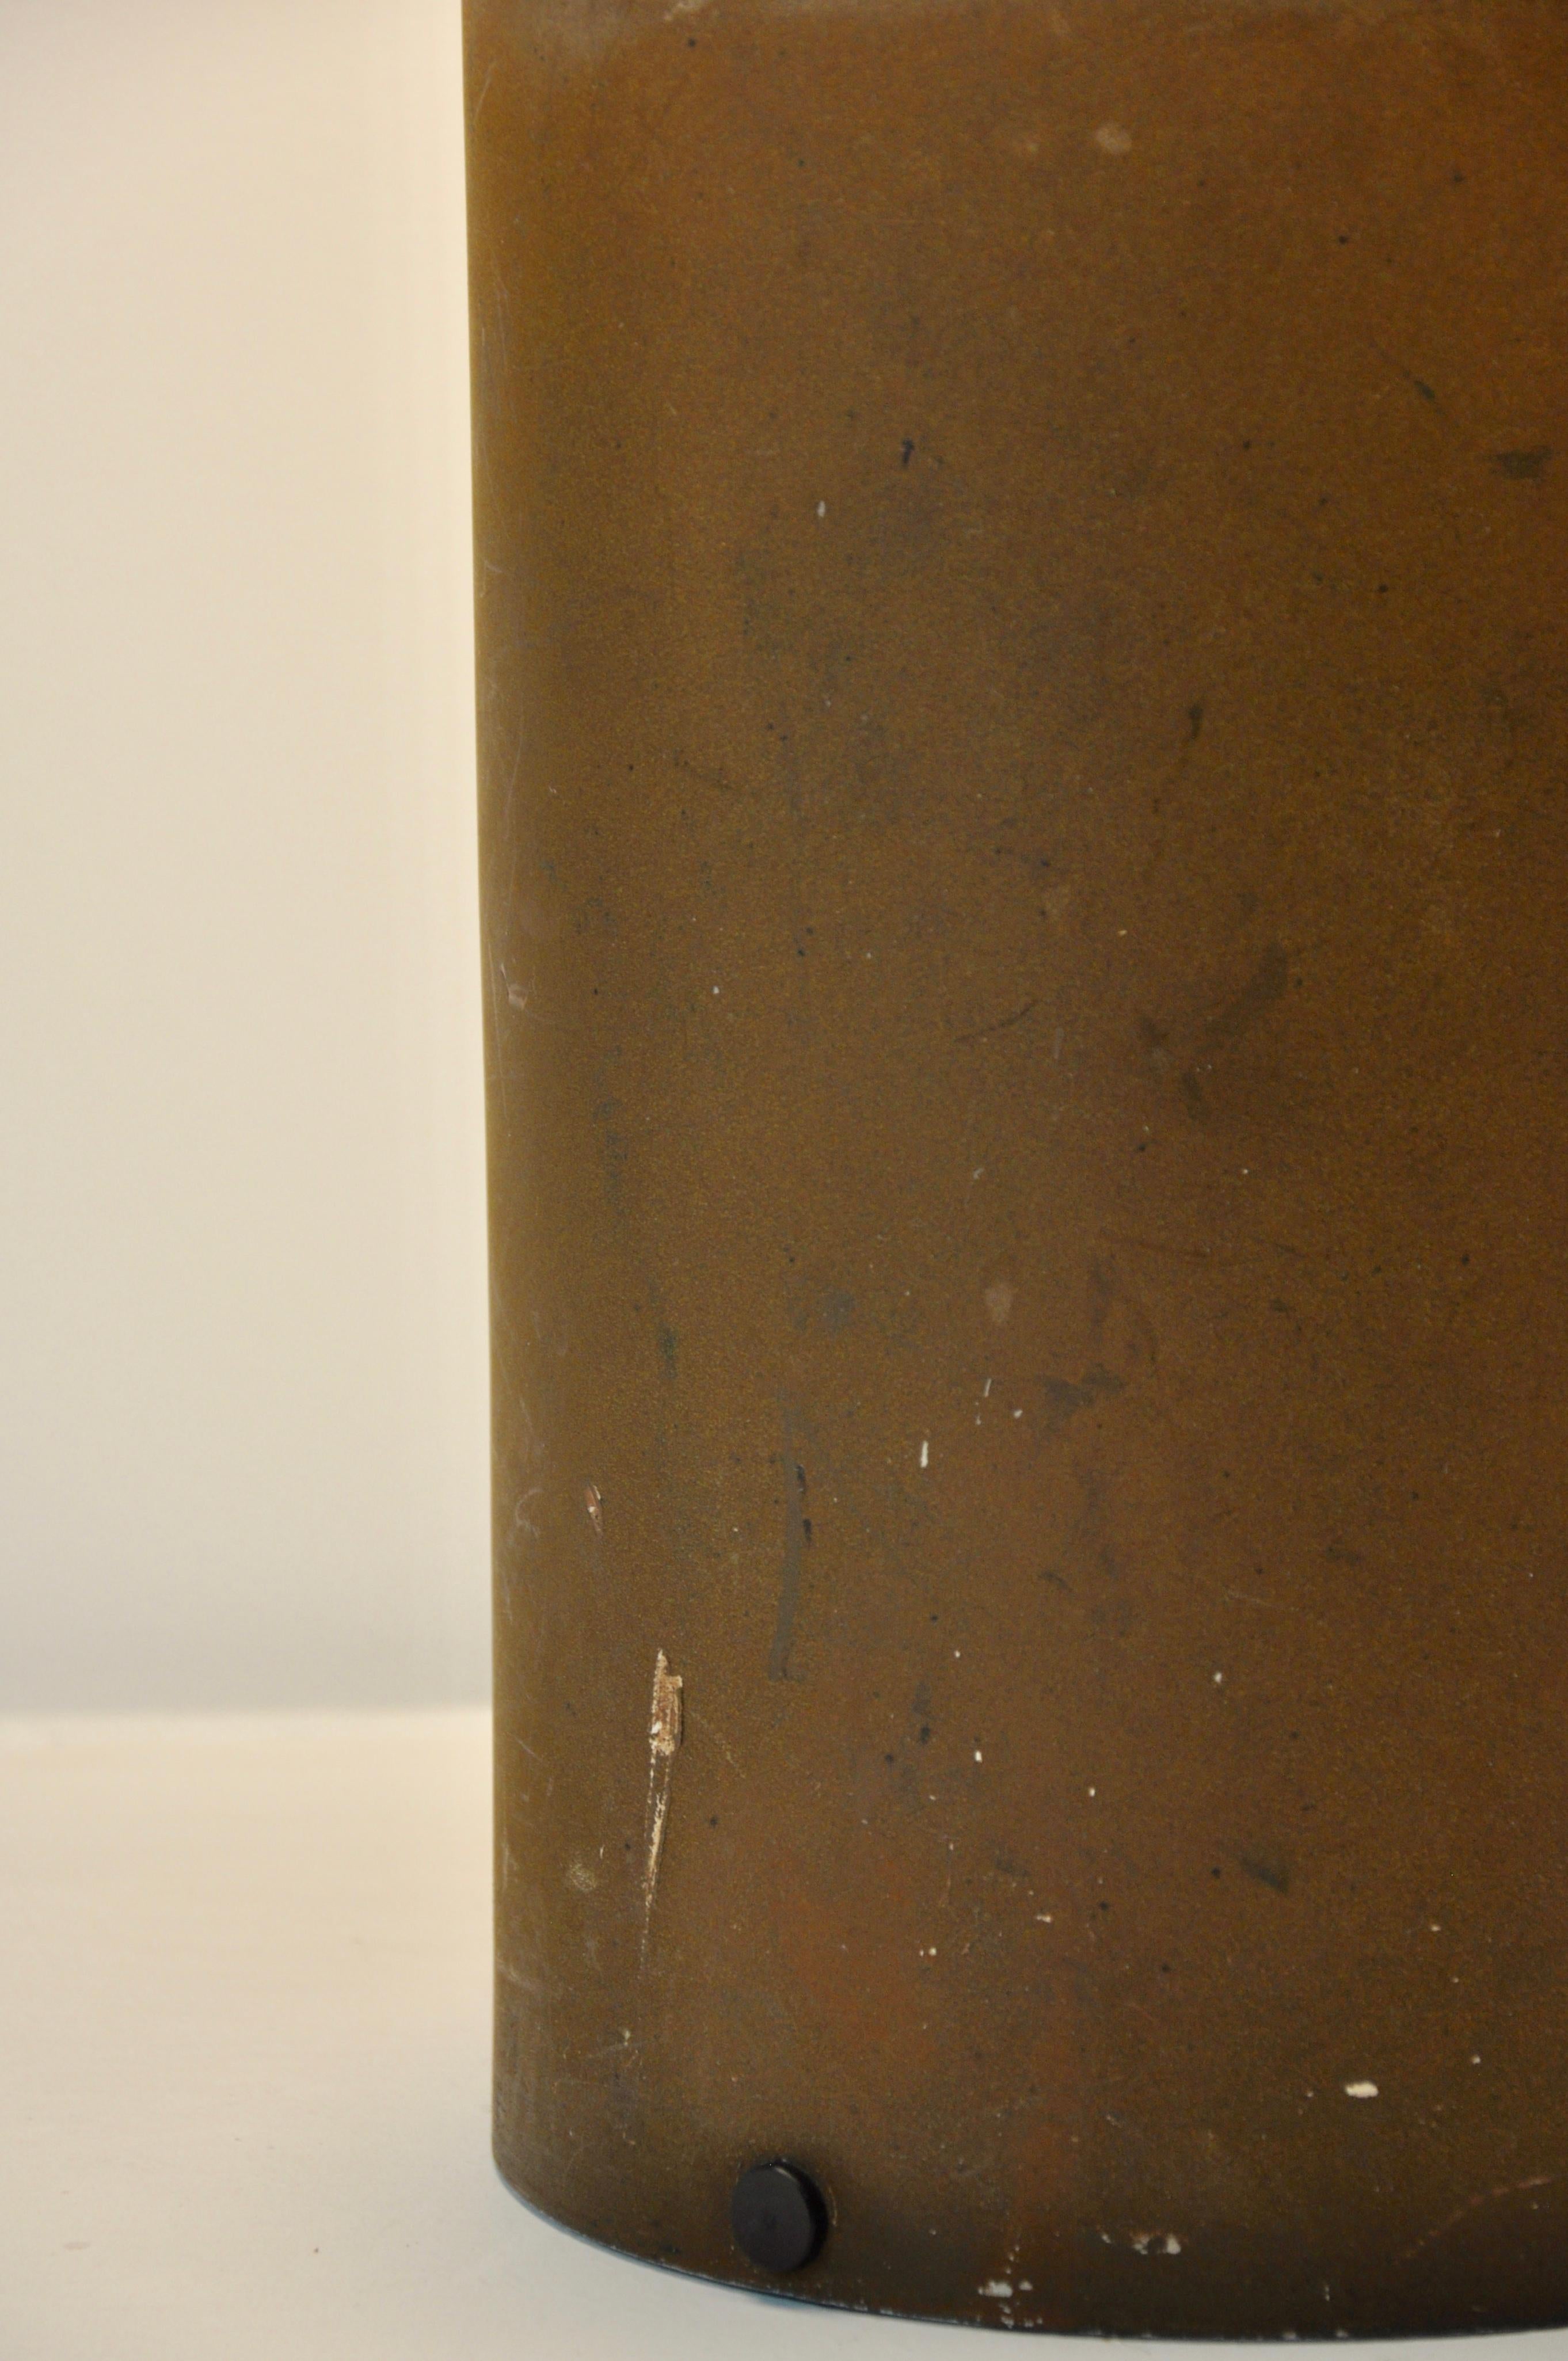 Brown colored lamp. Wear on the metal due to time and age of the object (see photo).